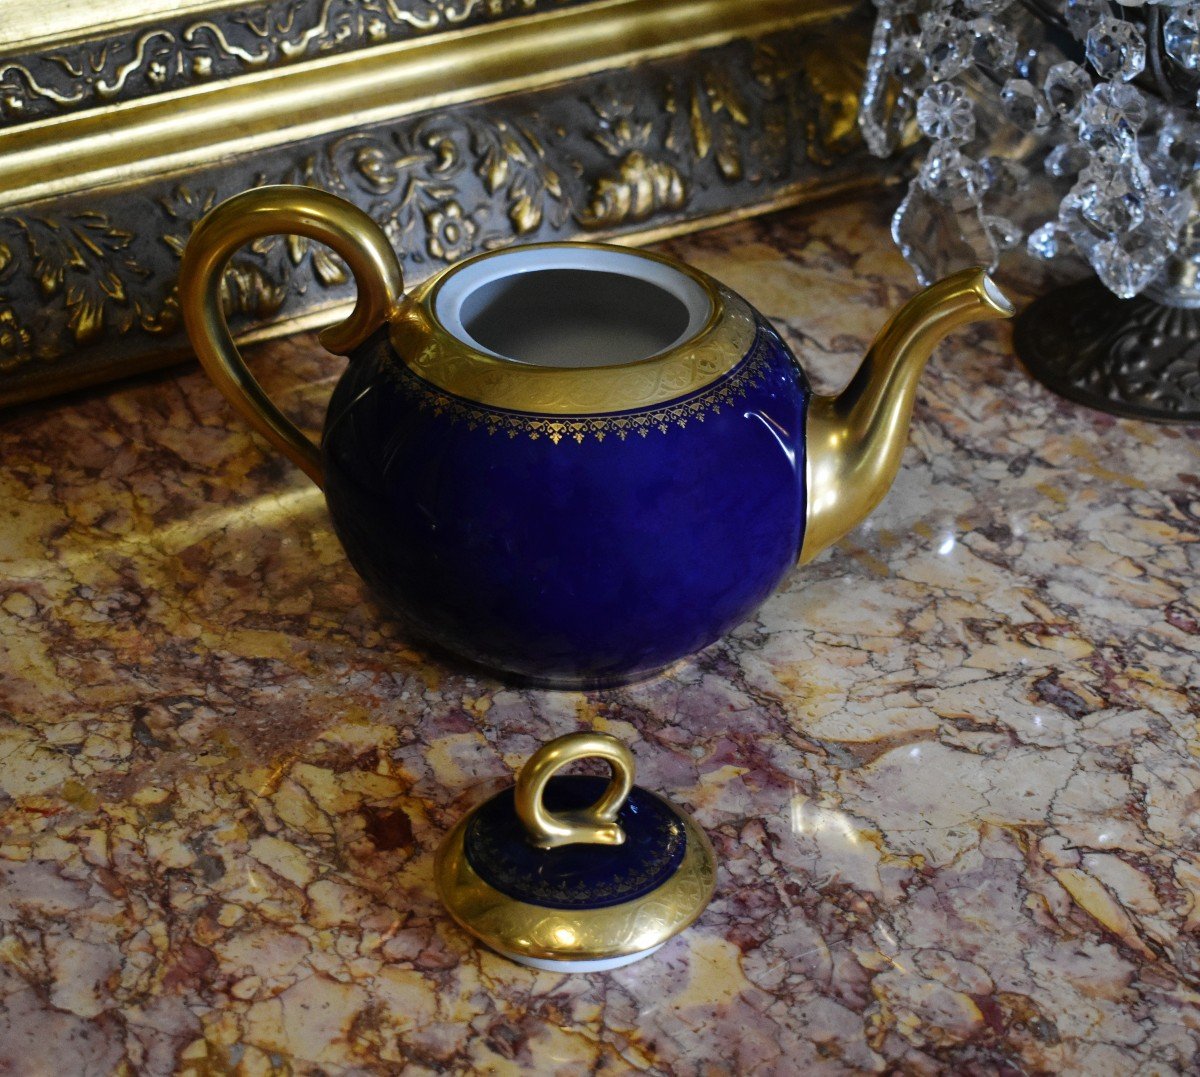 Jug, Coffee Pot Or Teapot In Limoges Porcelain In Kiln Blue And Gold Inlay.-photo-3